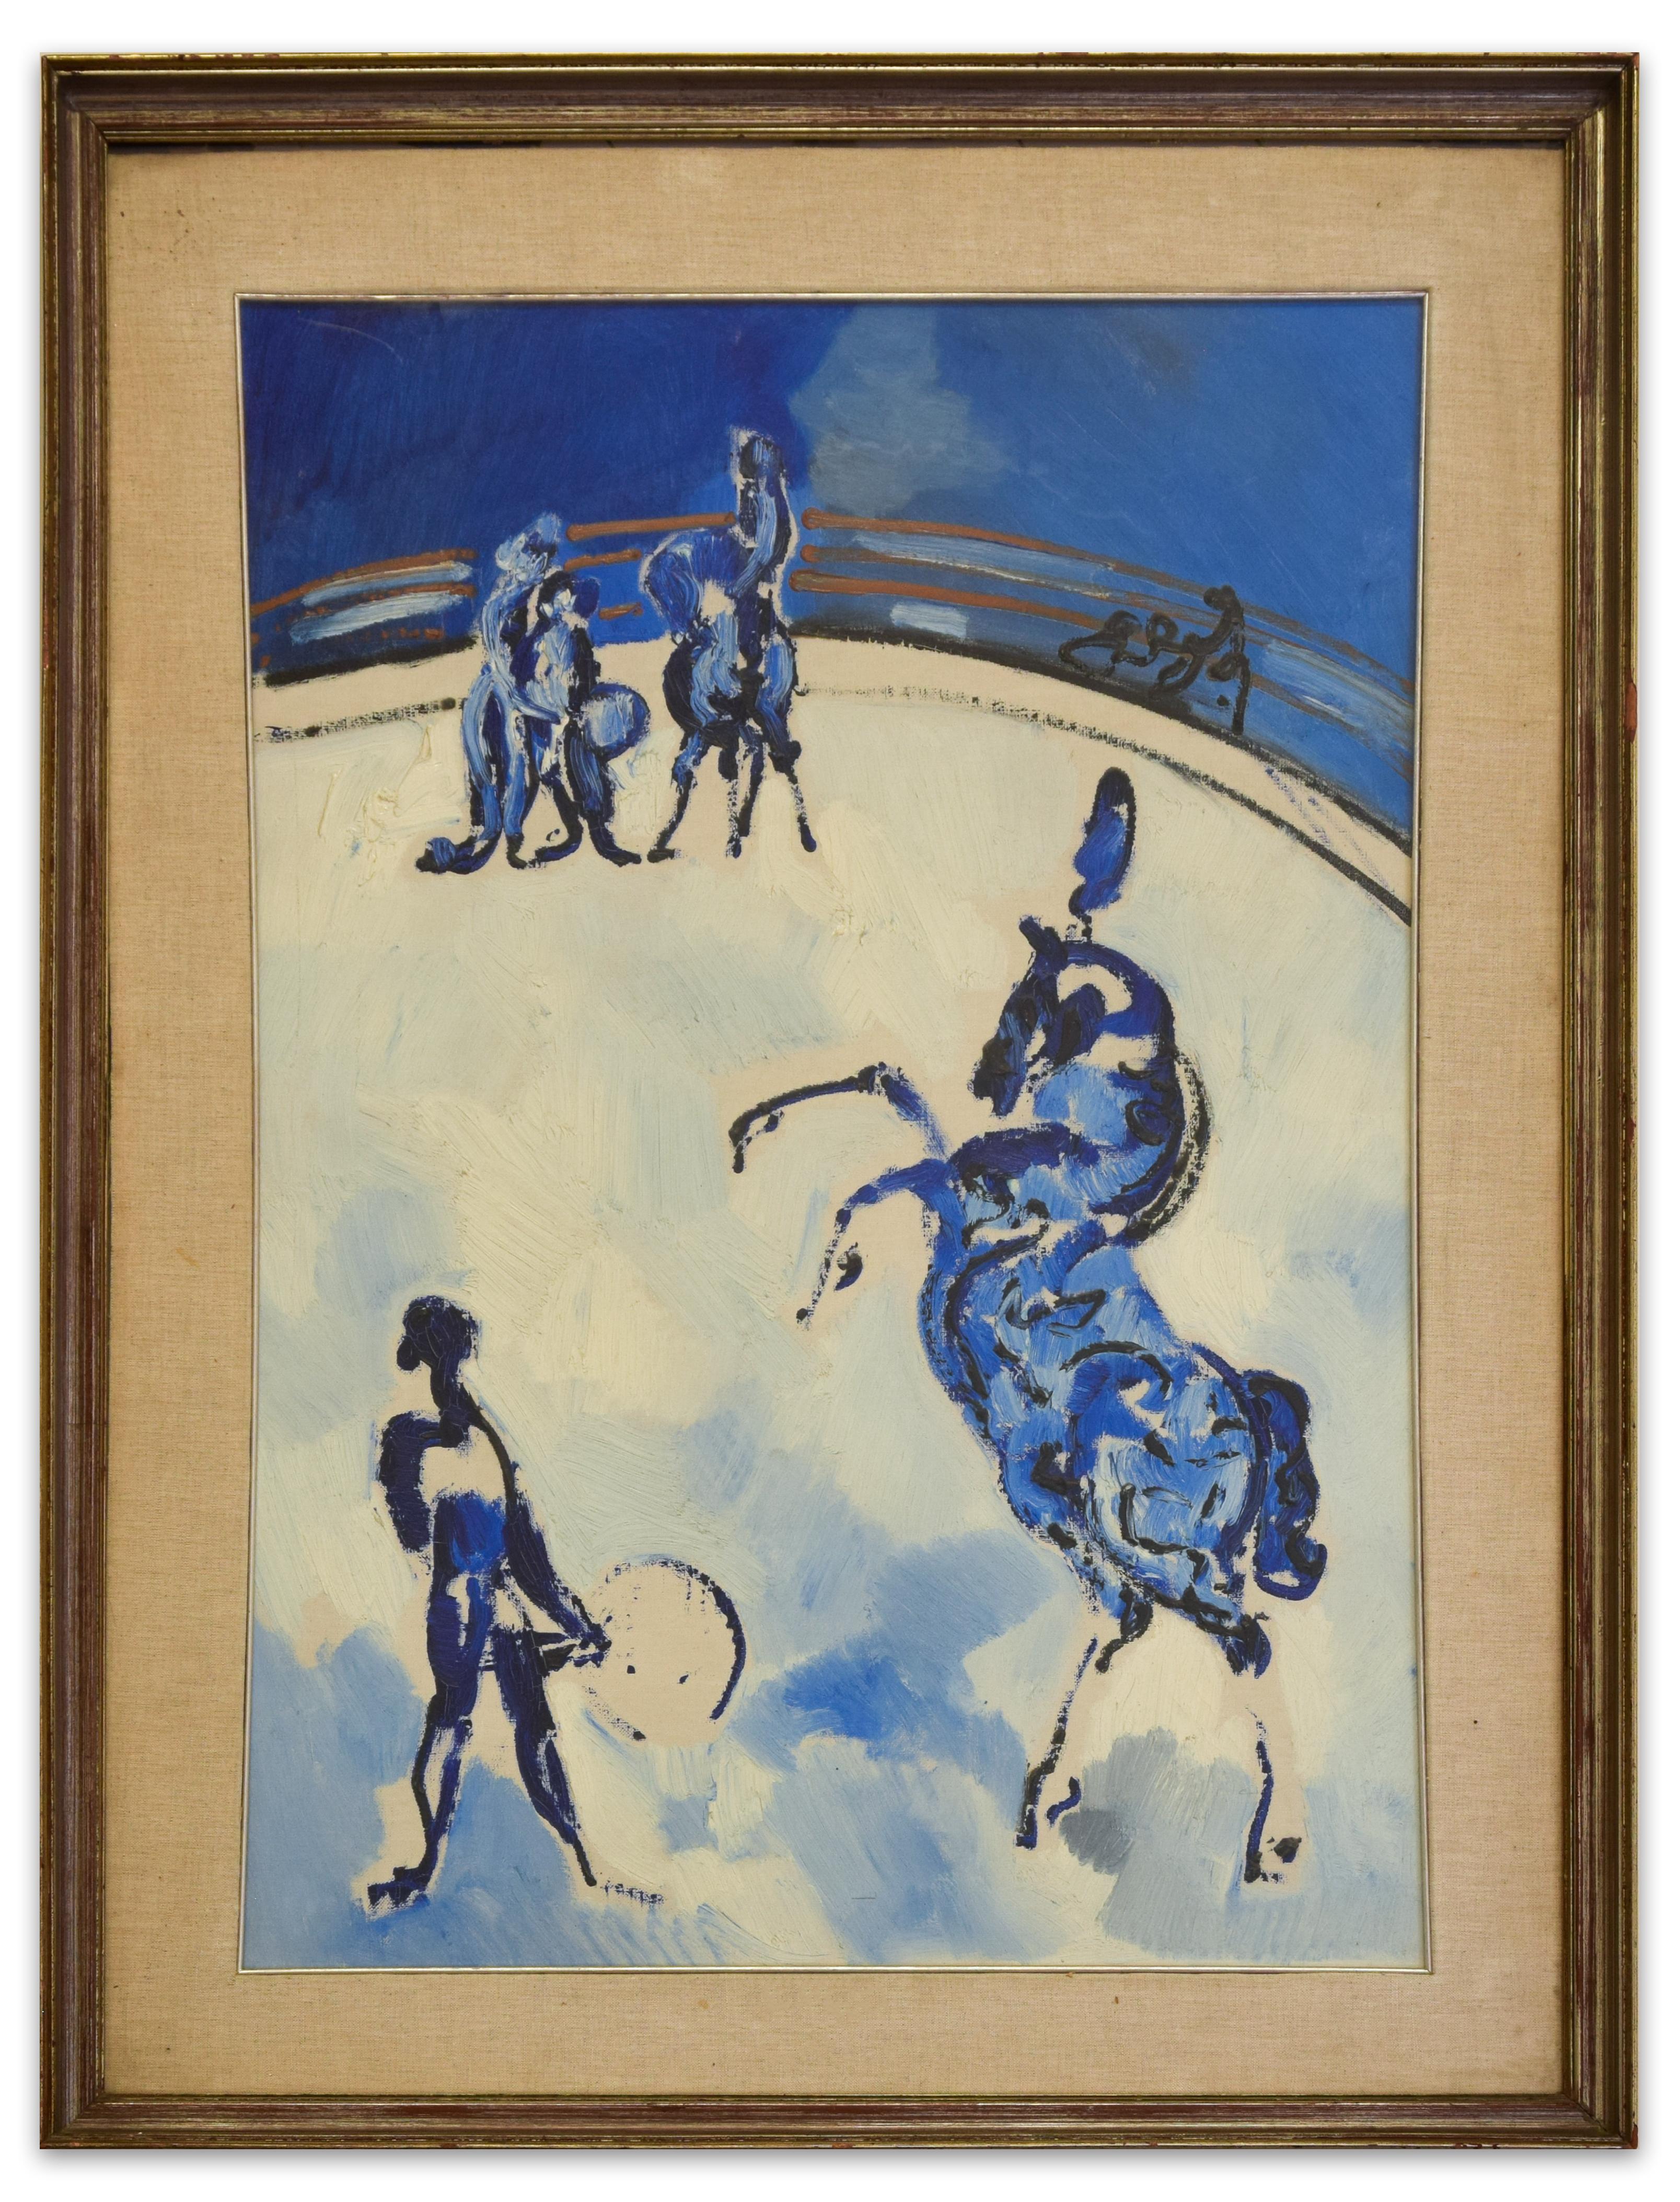 Circo (Circus) is an original oil painting on canvas, realized around 1970's by the Italian artist Antonio Vangelli (Rome, 1917 -2003). 

This circus image with the fineness of the graduation of blue tones has the unmistakable touch of the Italian